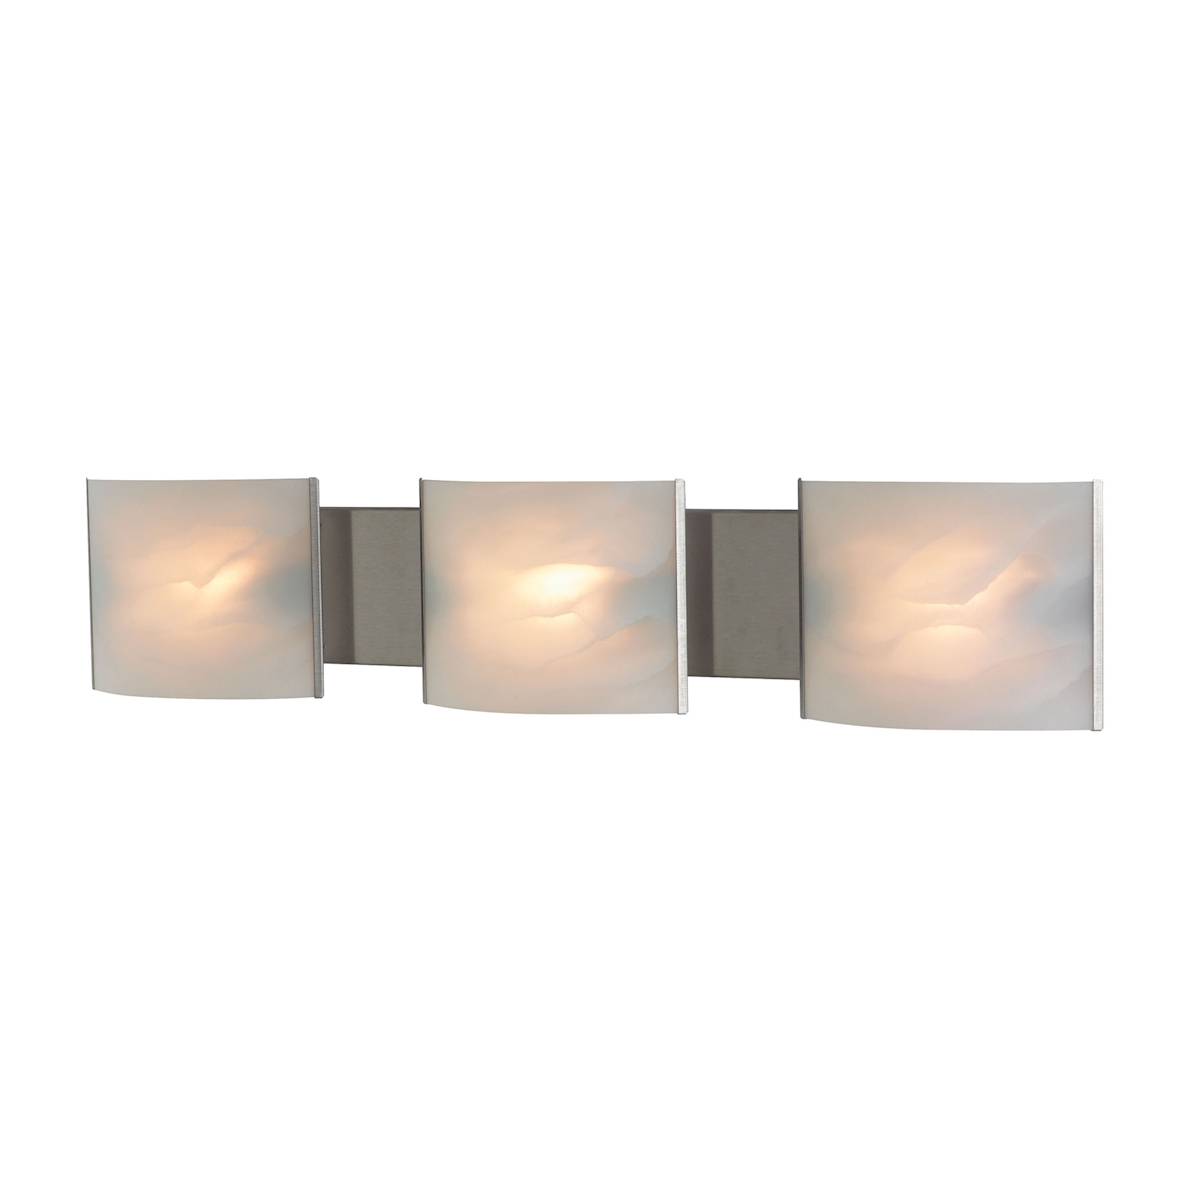 Pannelli Vanity - 3 Light with Lamps. White Alabaster Glass / SS Finish